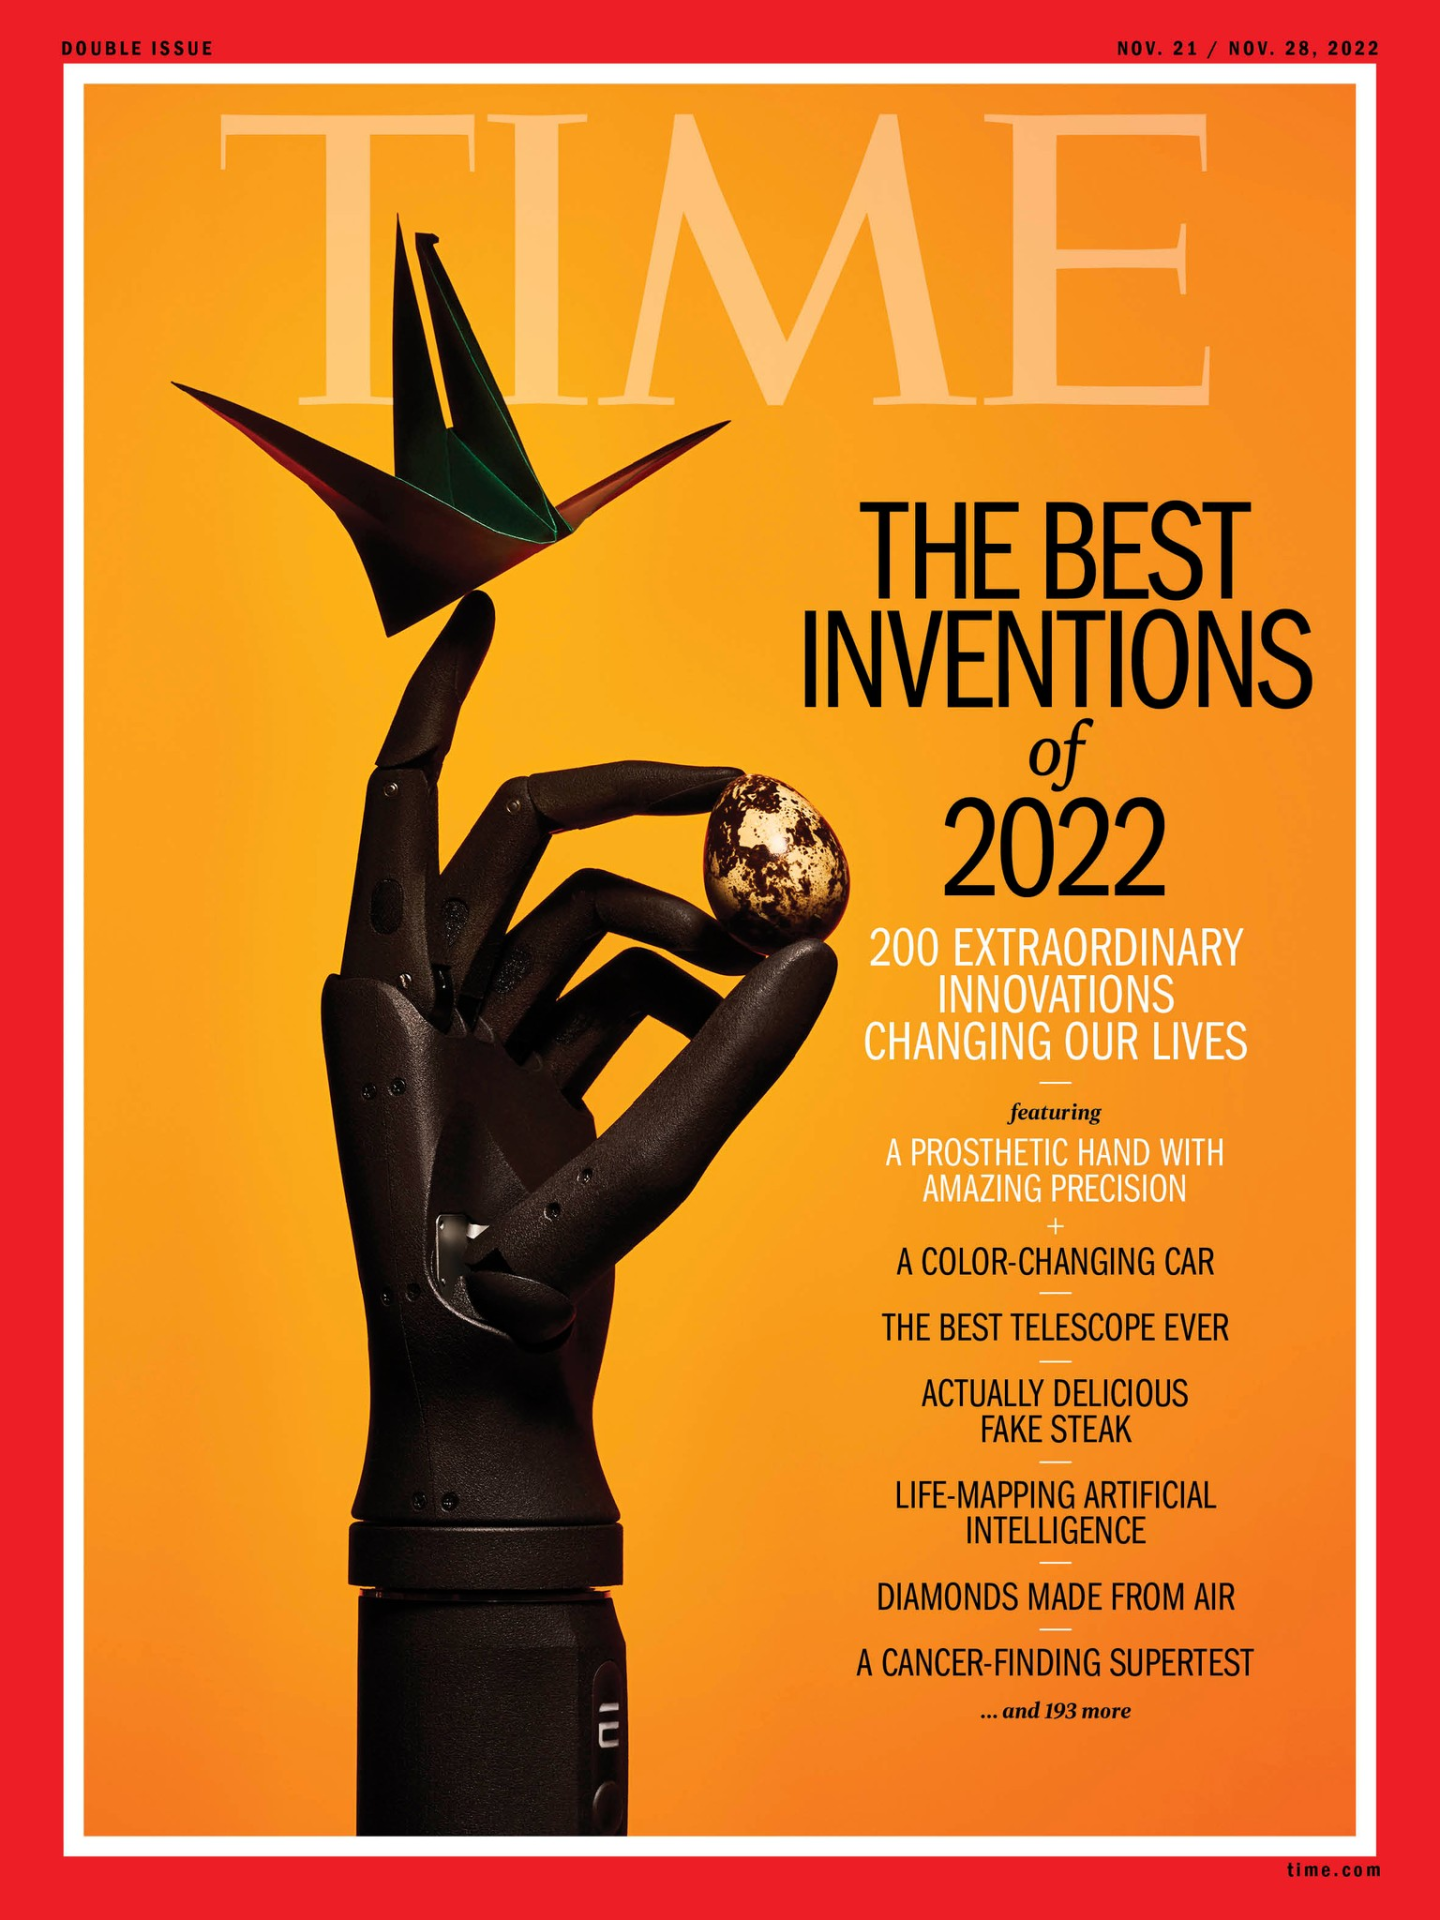 Quantum Computer Makes Time'S Best Invention Of 2022.